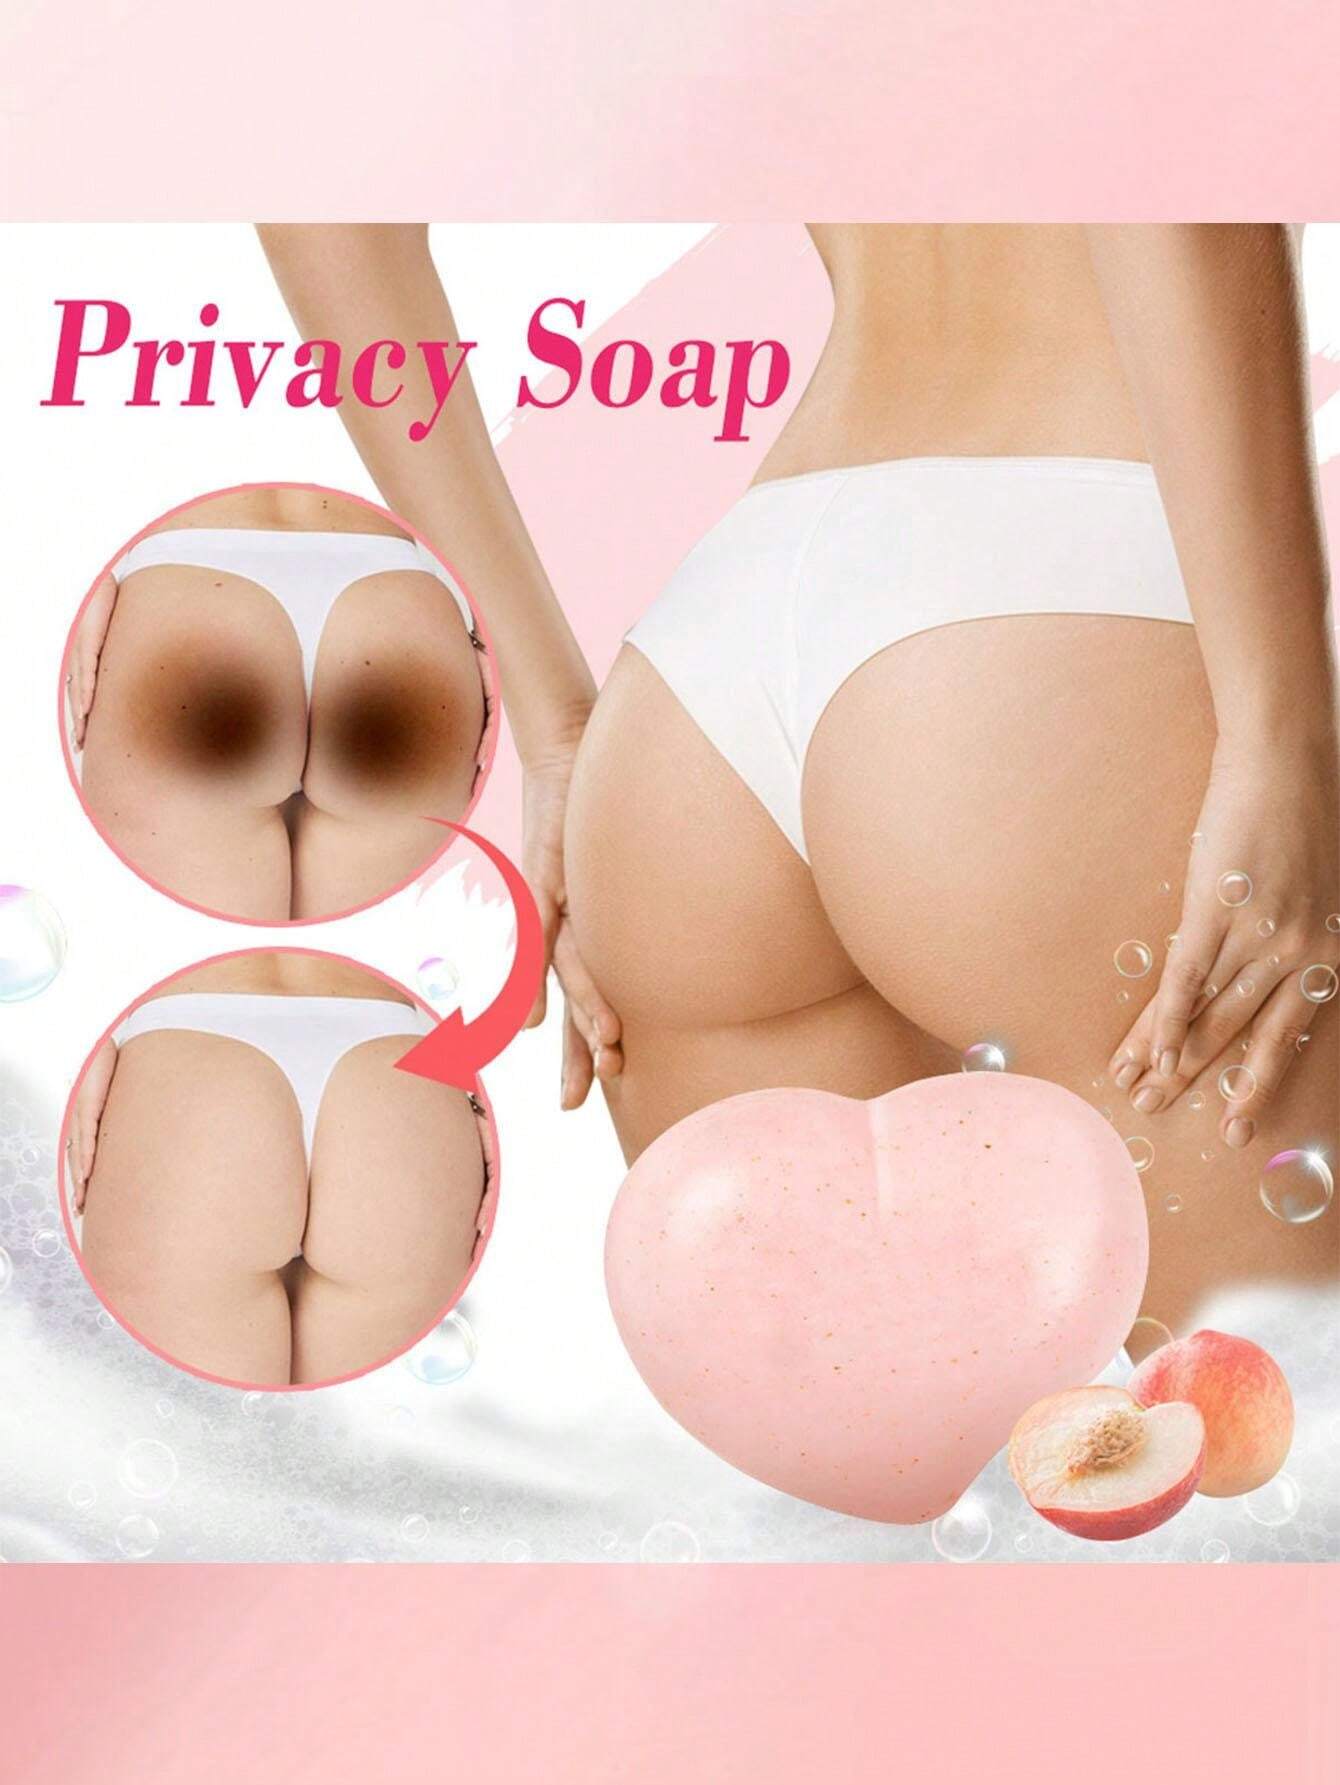 1pc Peach Soap, Moisturizing & Glowing Fragrance Soap, Handmade Facial & Body Cleansing Soap, Deep Clean Pores, Control Oil, Smooth & Soften Skin